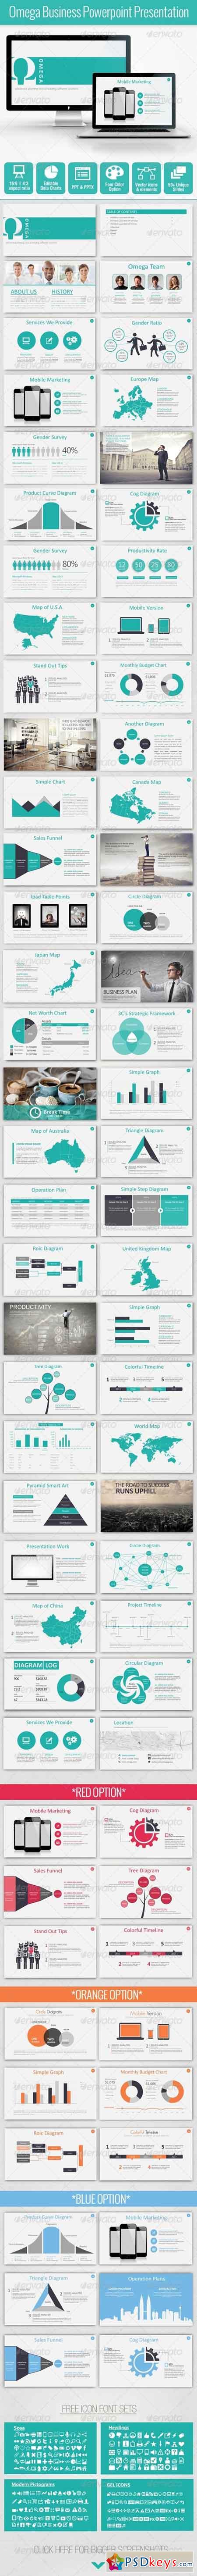 Omega Bussiness Powerpoint Template 7517275